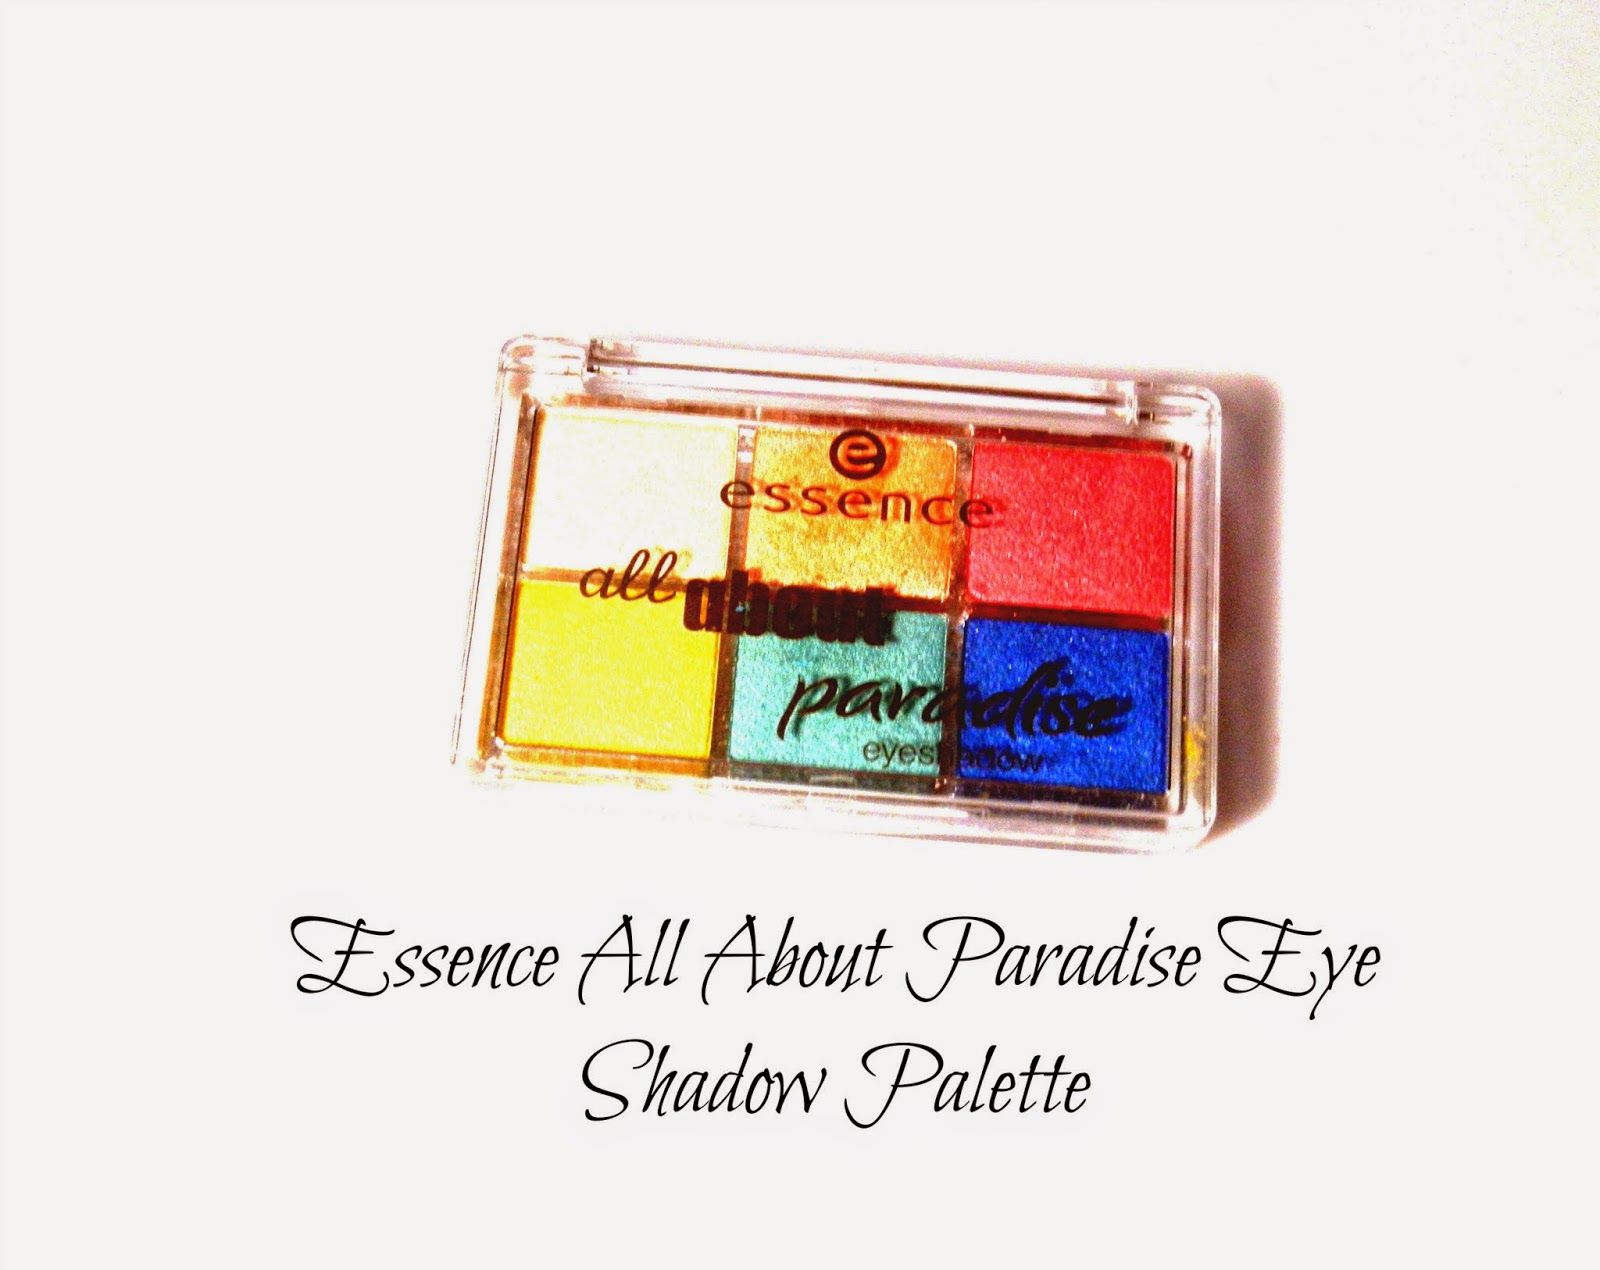 Essence All About Paradise Eye Shadow Palette Swatches 